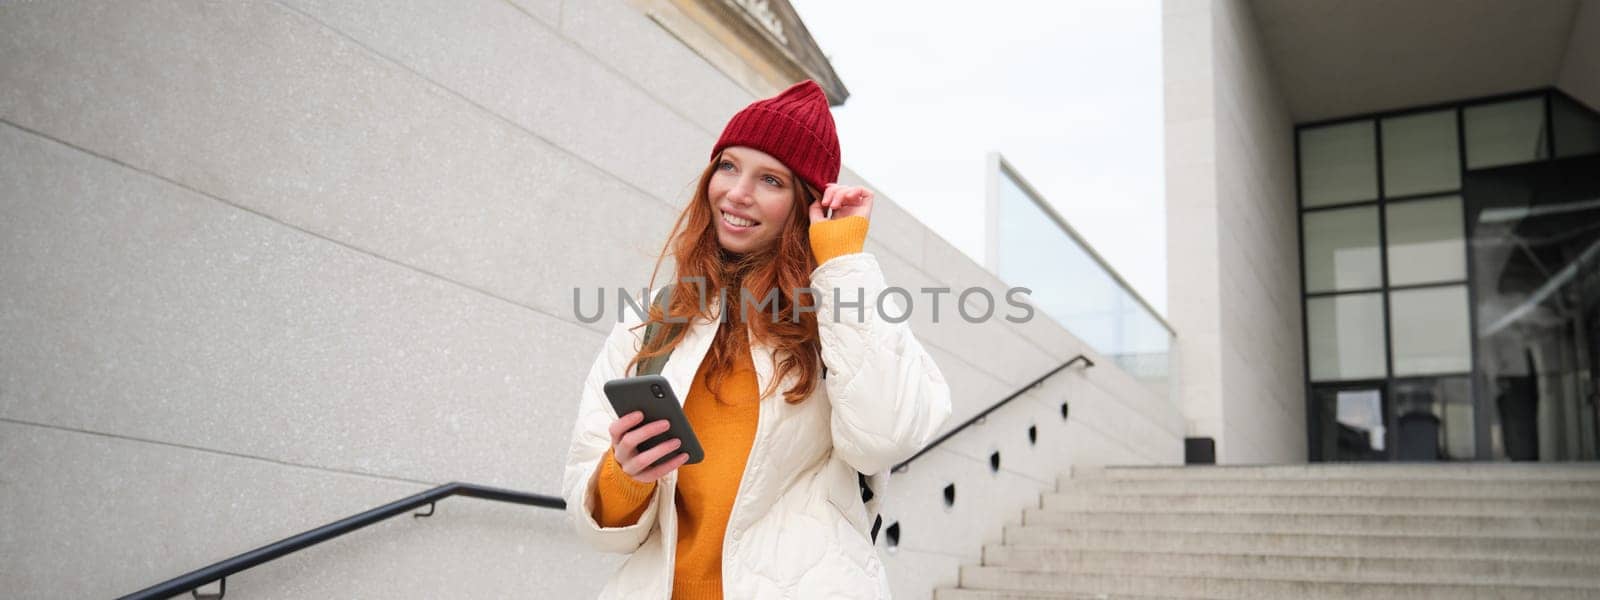 Happy girl student in red hat, holds smartphone, tourist looks at map app on her phone, explores sightseeing, texts message, looks for couchsurfing, rents place to stay online.